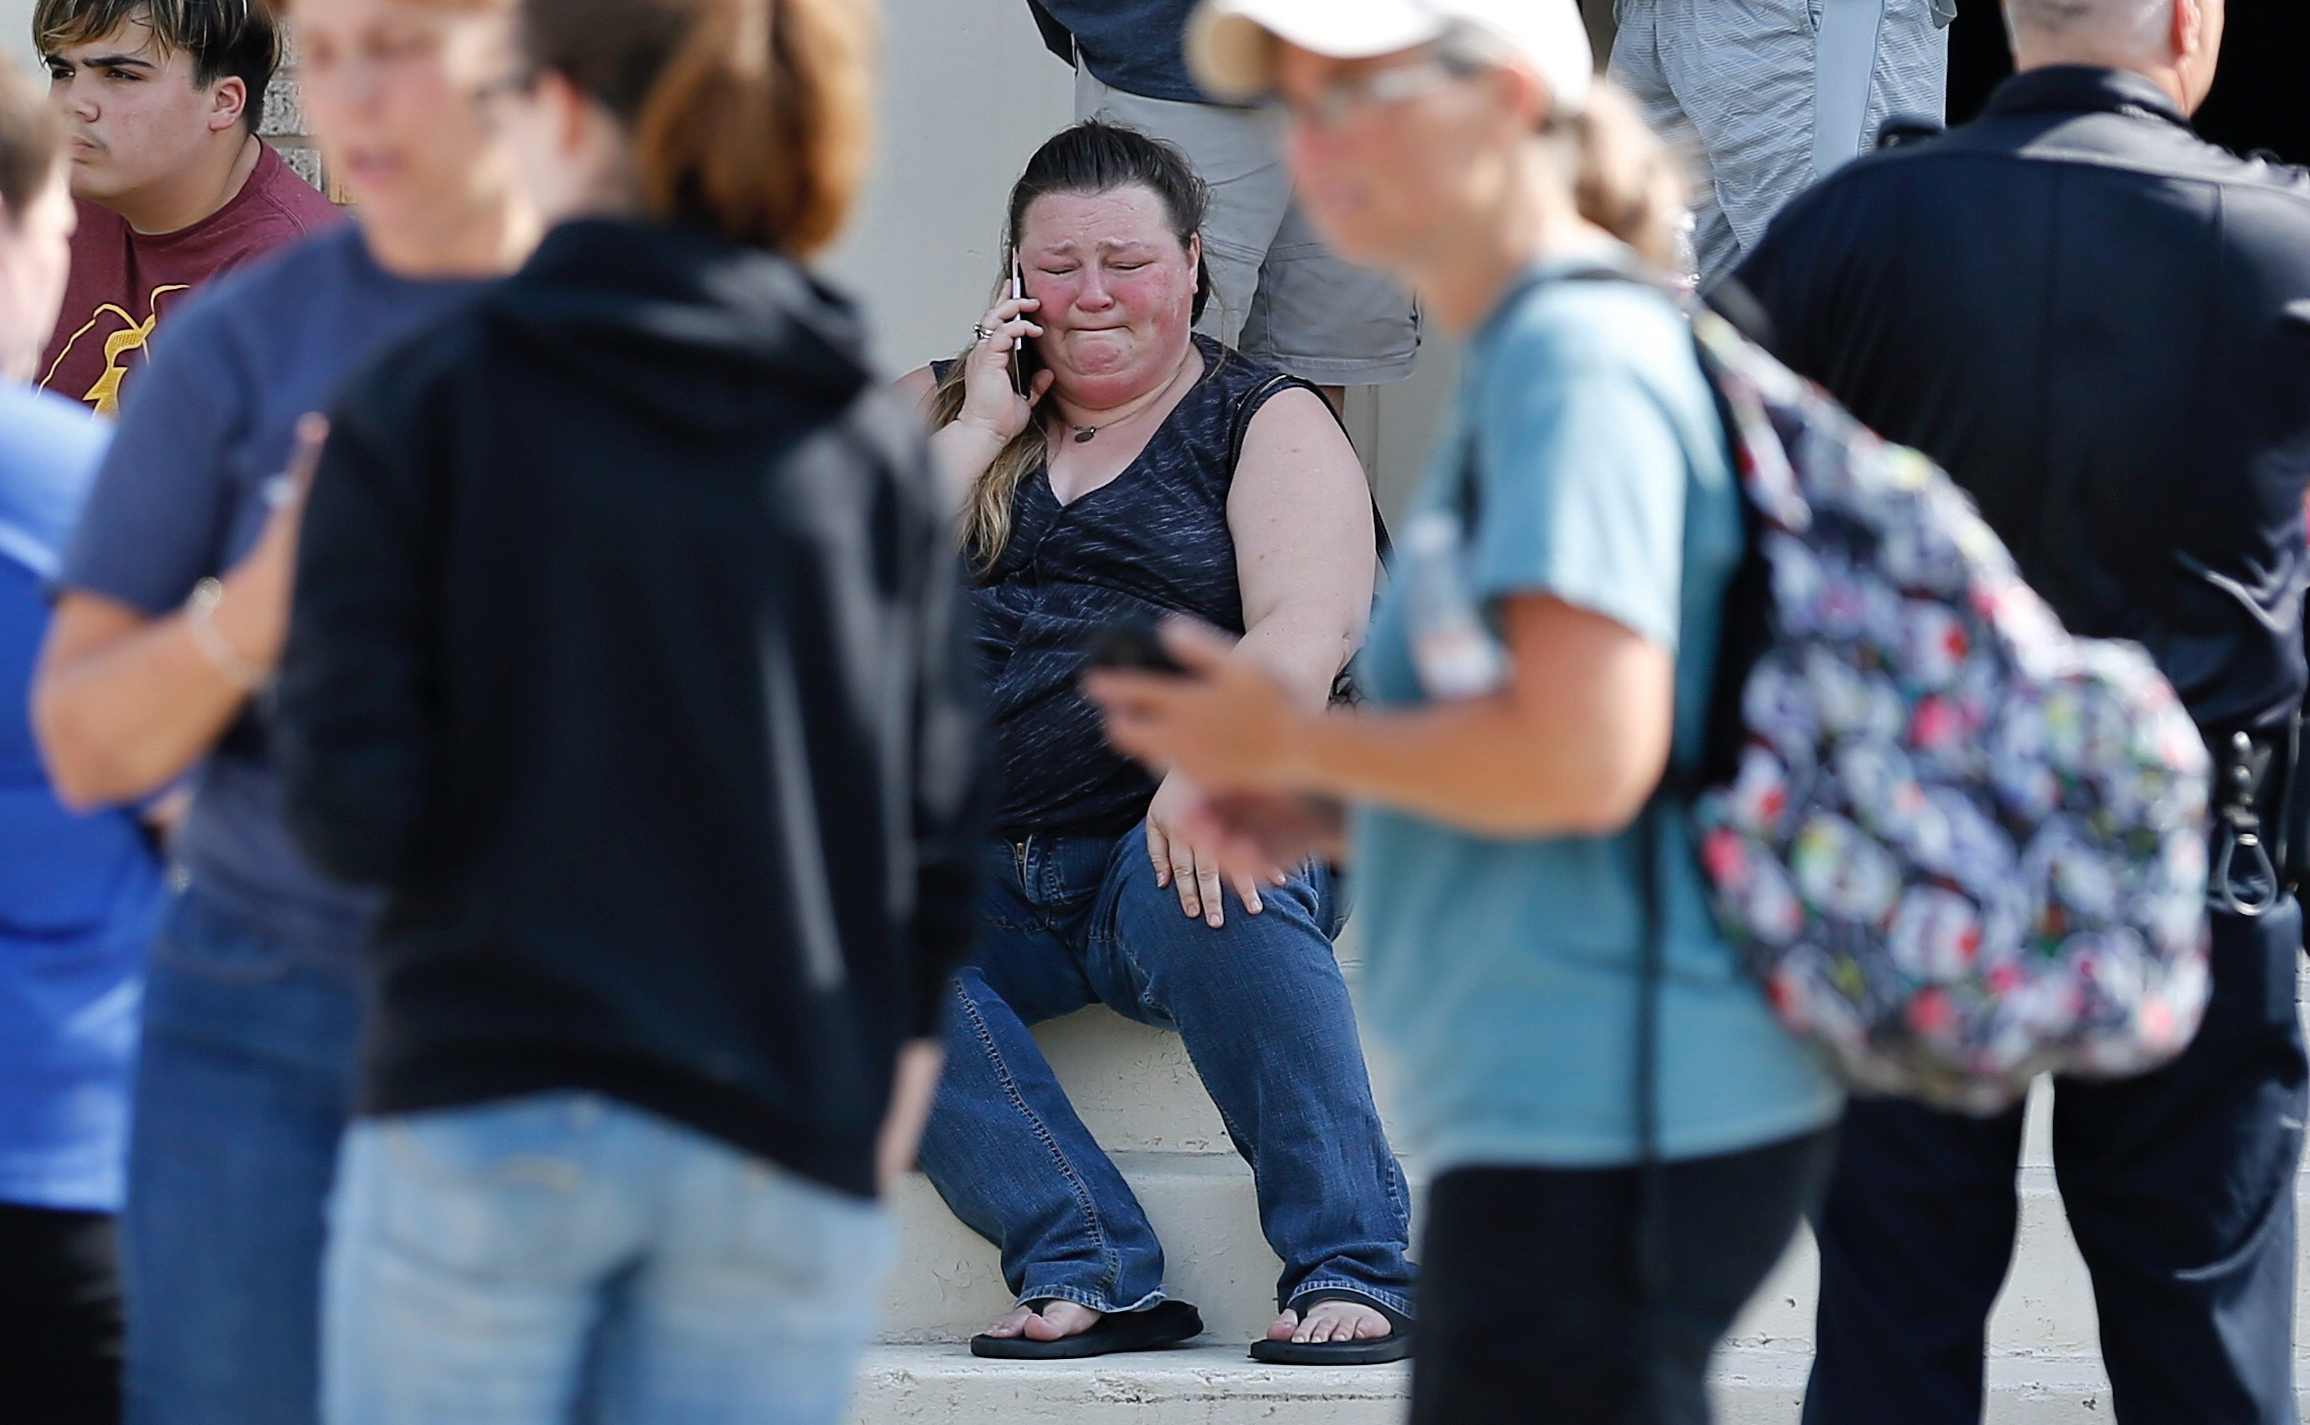 PHOTO: A woman reacts while making a phone call outside the Alamo Gym where parents wait to reunite with their children following a shooting at Santa Fe High School in Santa Fe, Texas, May 18, 2018.